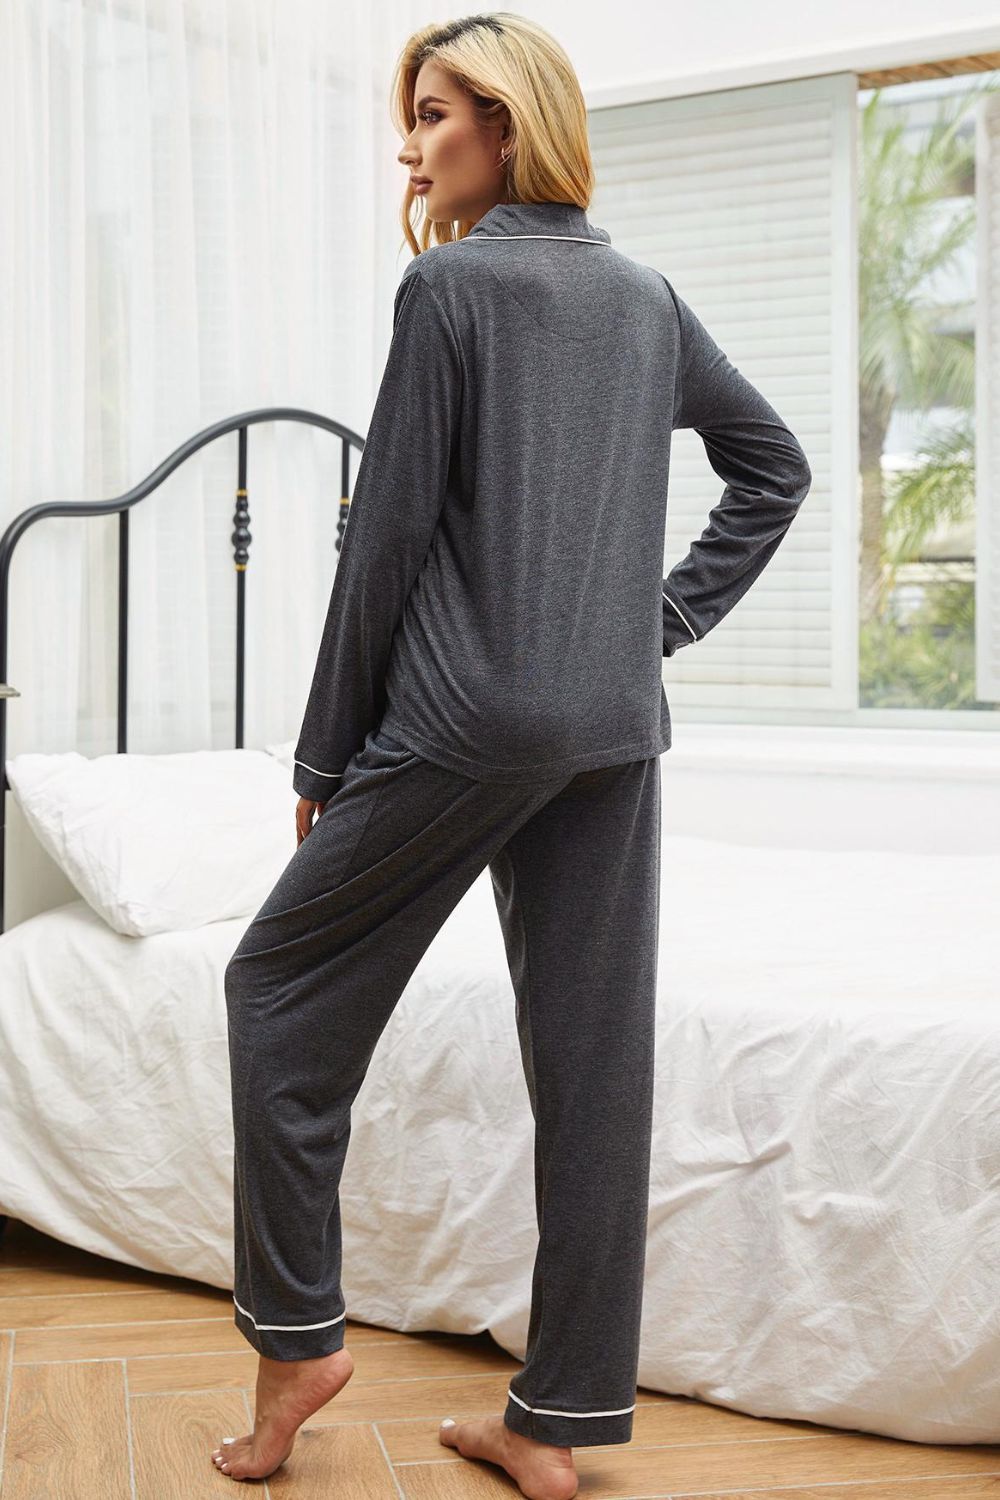 Contrast Piping Button Down Top and Pants Loungewear Set - Fashion Girl Online Store